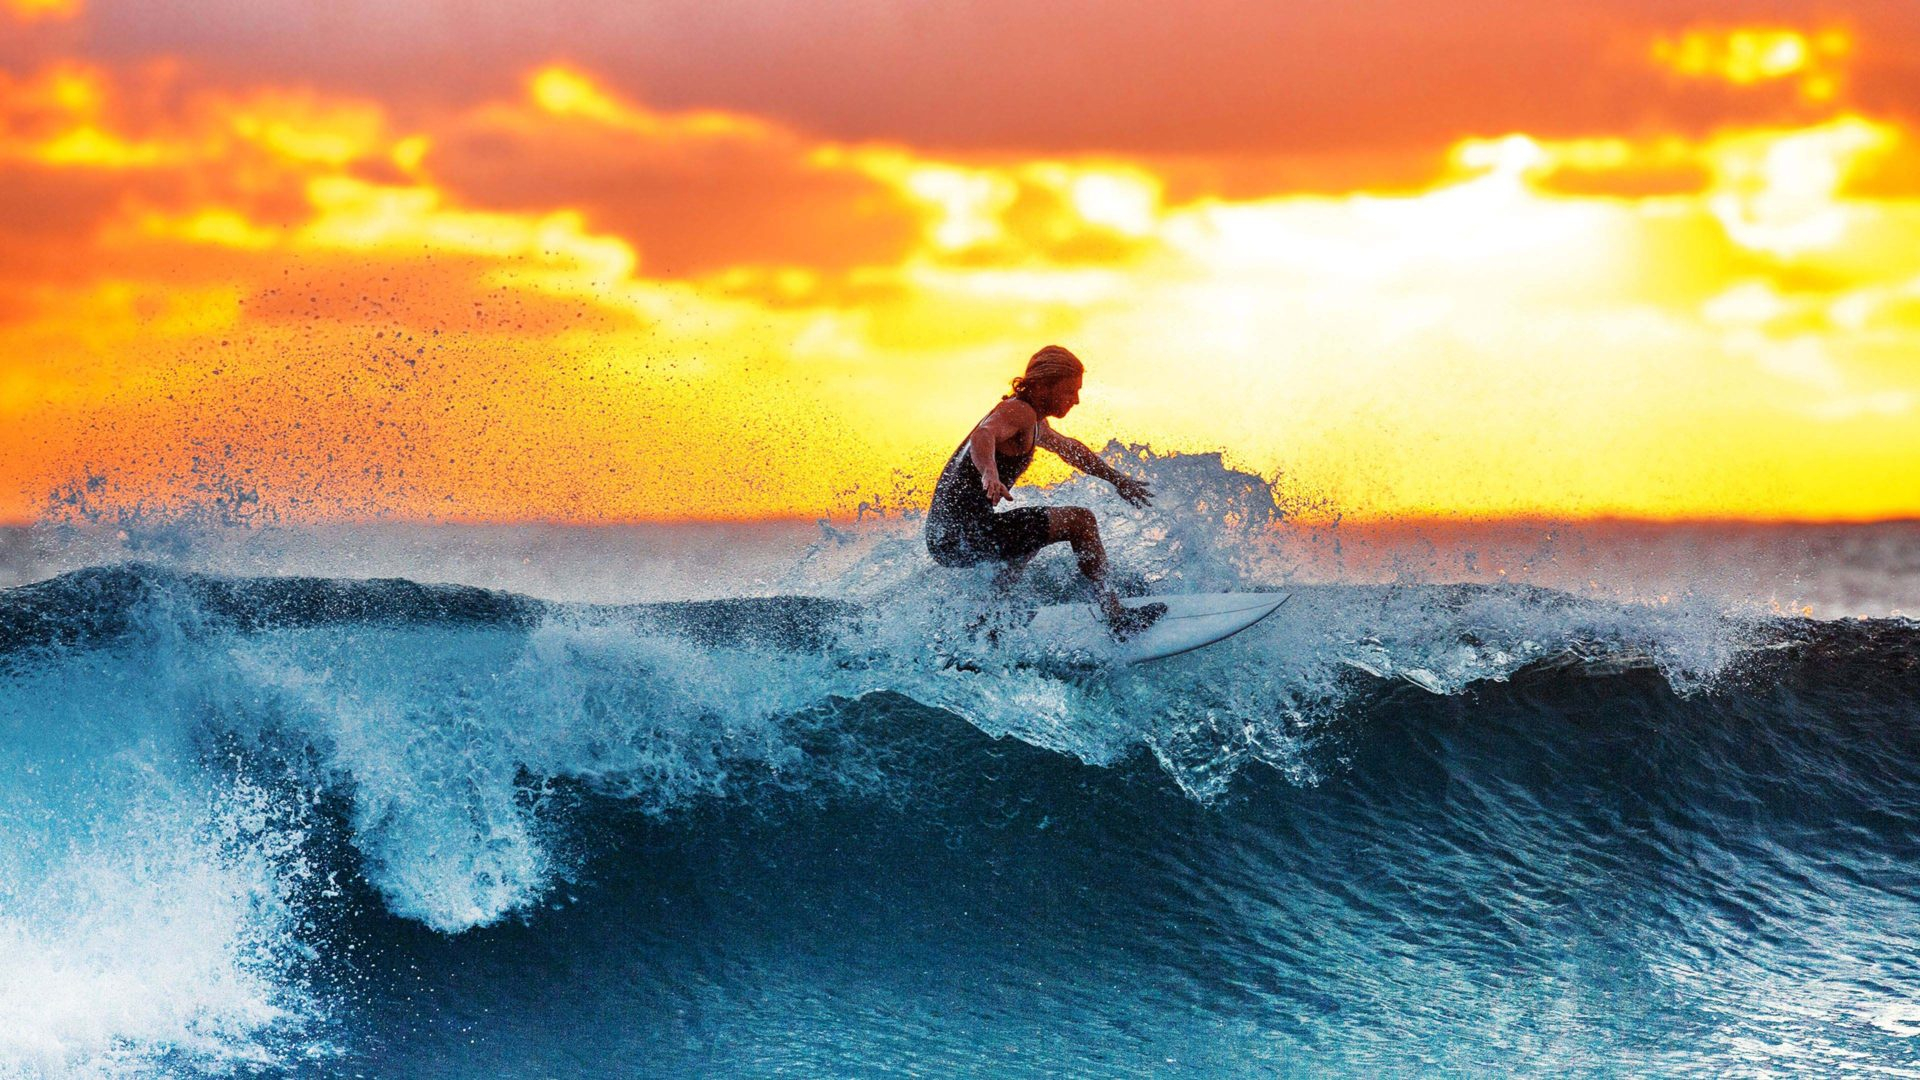 1920x1080 Surfing Wallpaper Surfer Play With Waves Image For My Deskto KDE Store